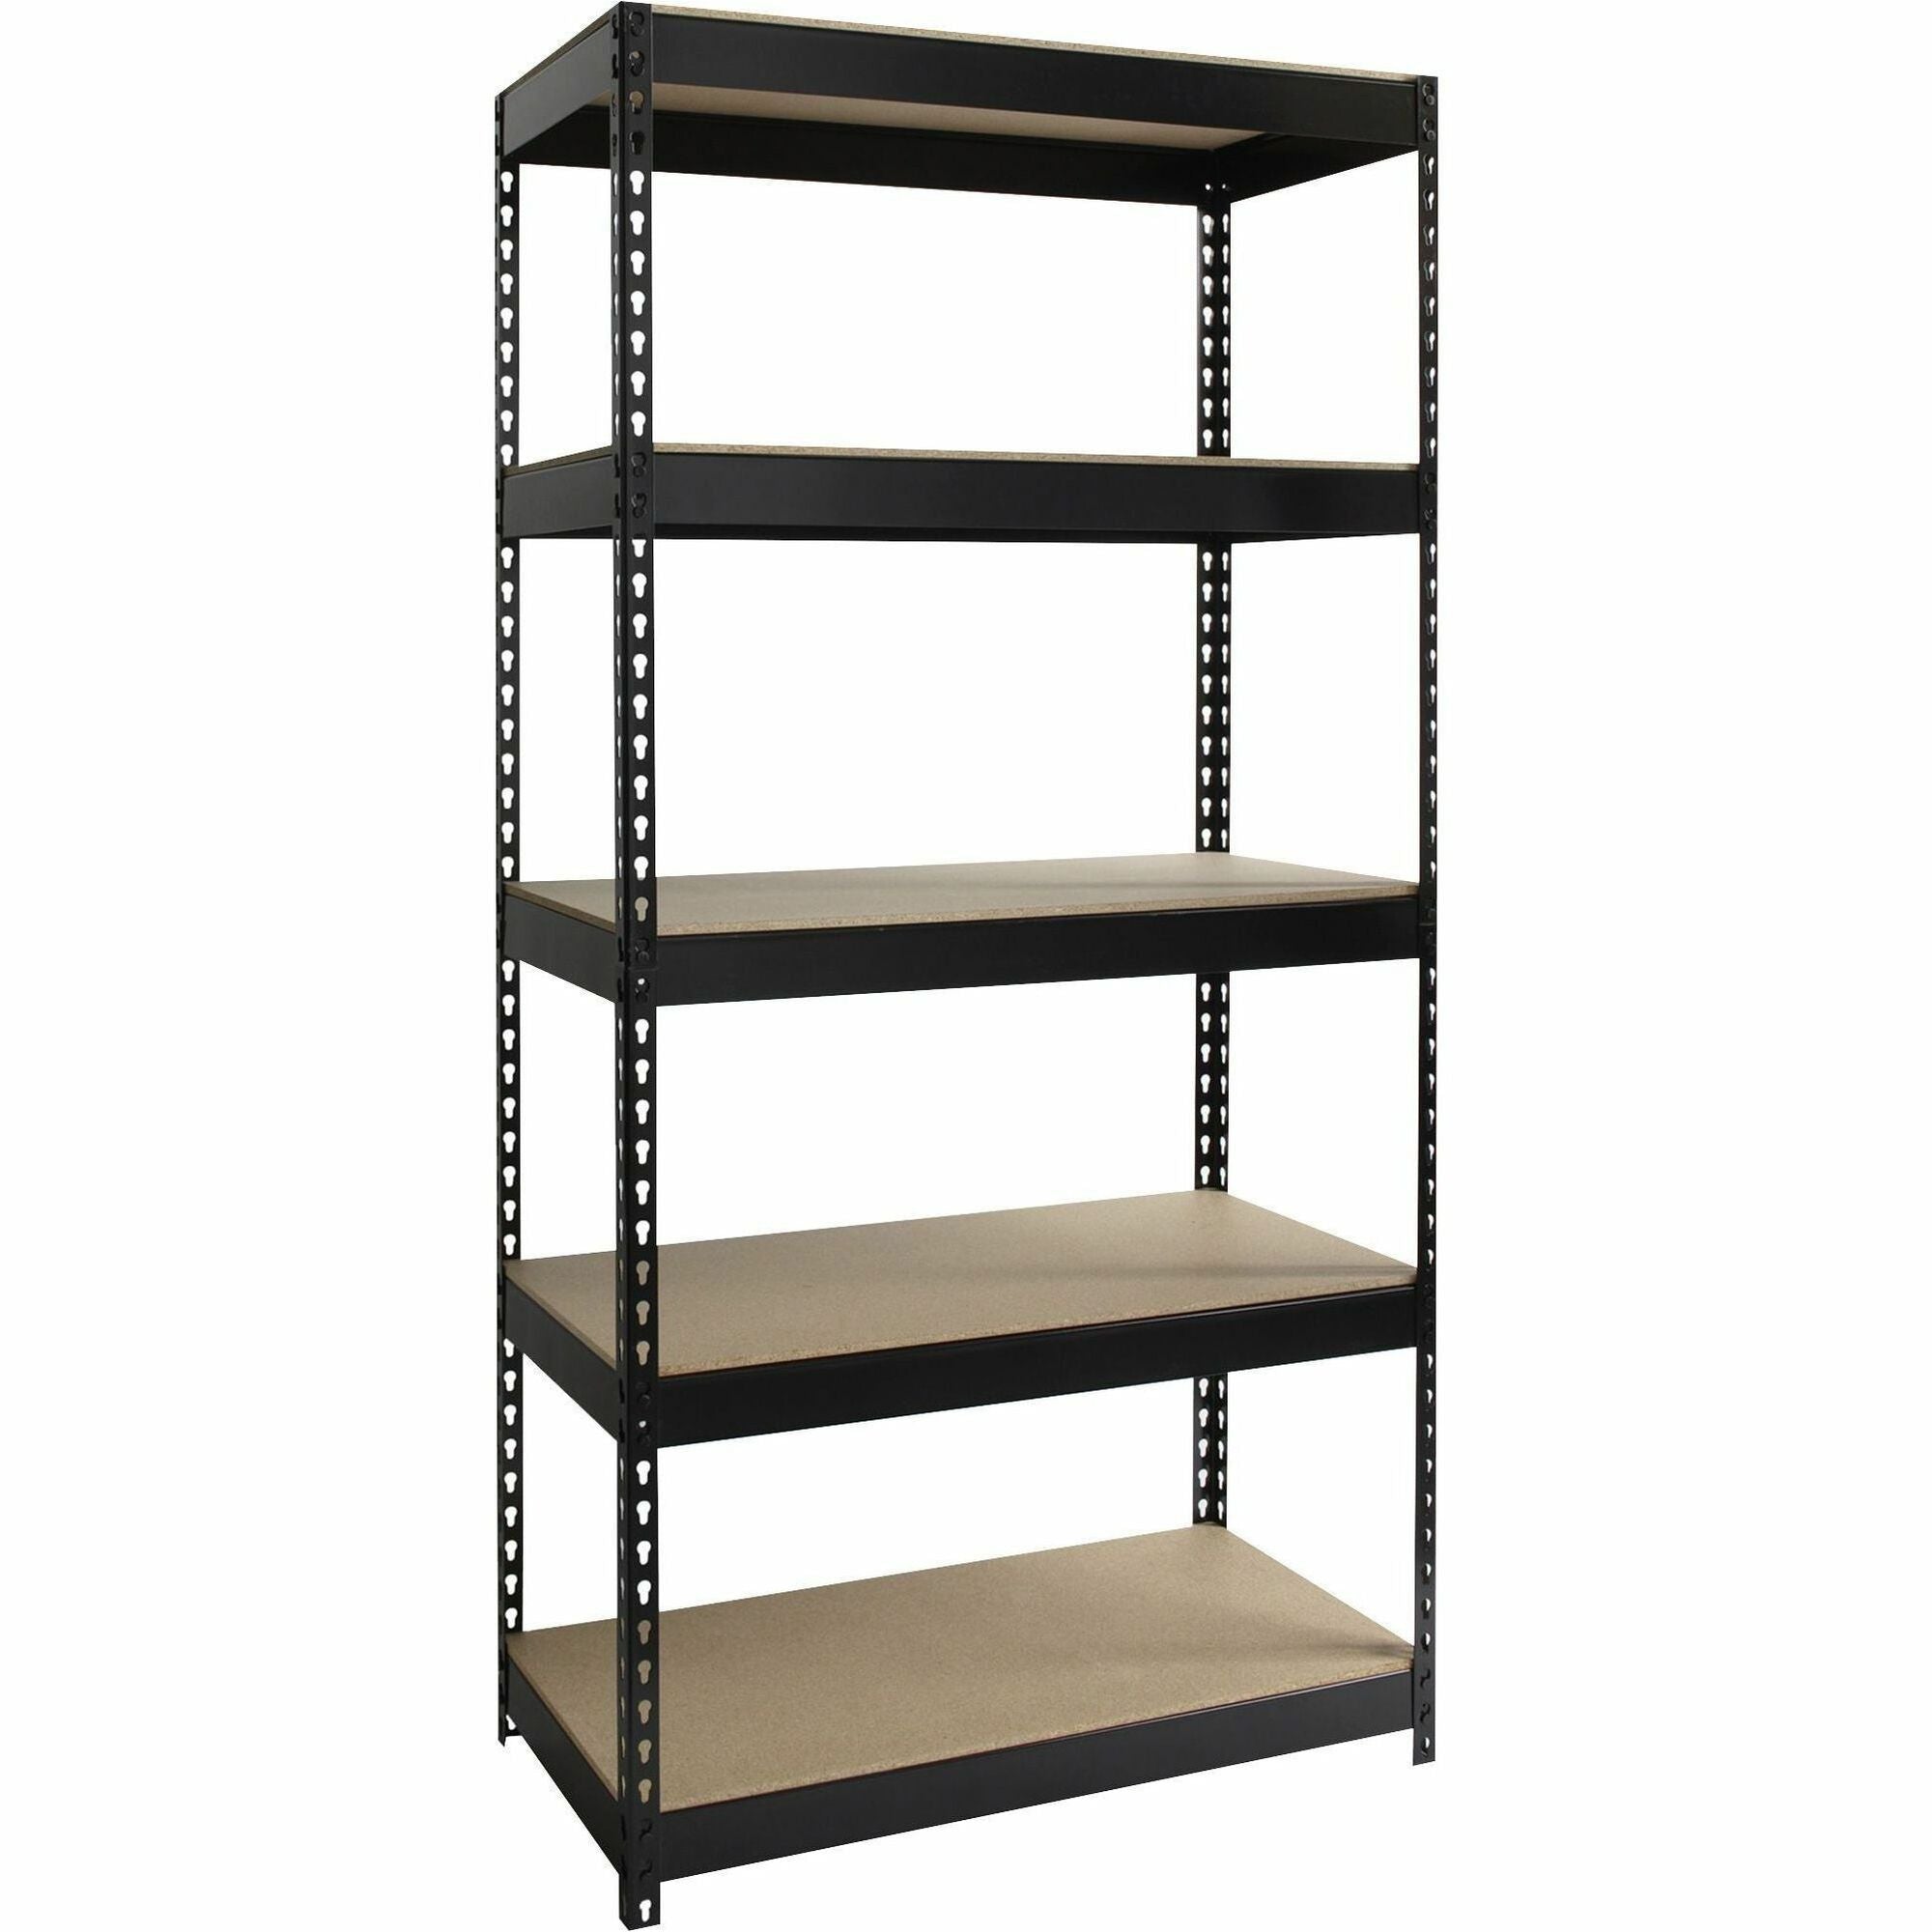 Lorell Fortress Riveted Shelving - 5 Compartment(s) - 5 Shelf(ves) - 72" Height x 36" Width x 18" Depth - Heavy Duty, Rust Resistant - 28% Recycled - Powder Coated - Black - Steel - 1 Each - 